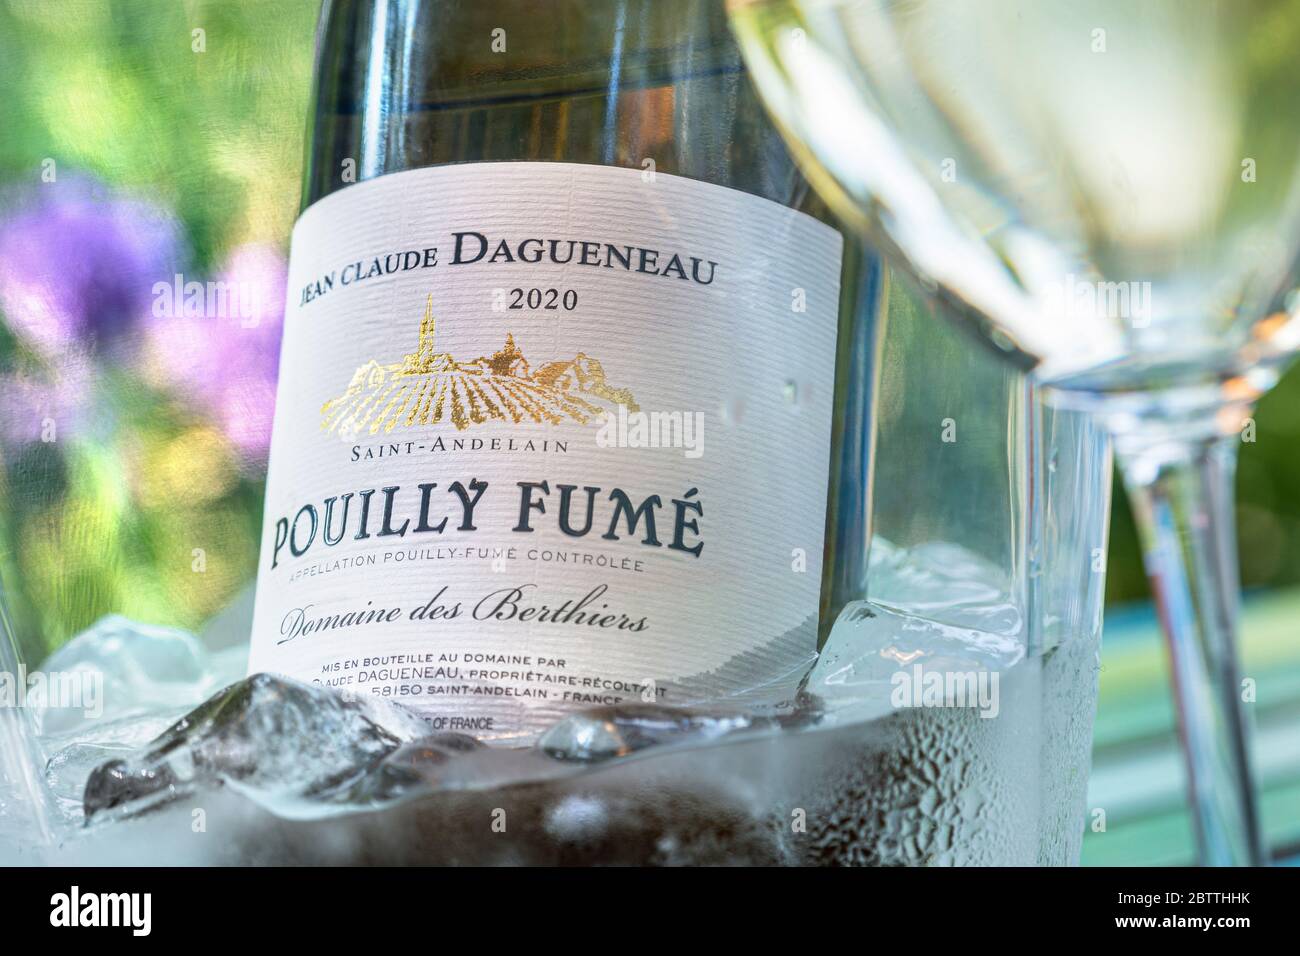 Pouilly Fume Sauvignon Blanc wine bottle and glass Jean-Claude Dagueneau 2020 post dated label in outdoor floral alfresco ice wine cooler Loire France Stock Photo